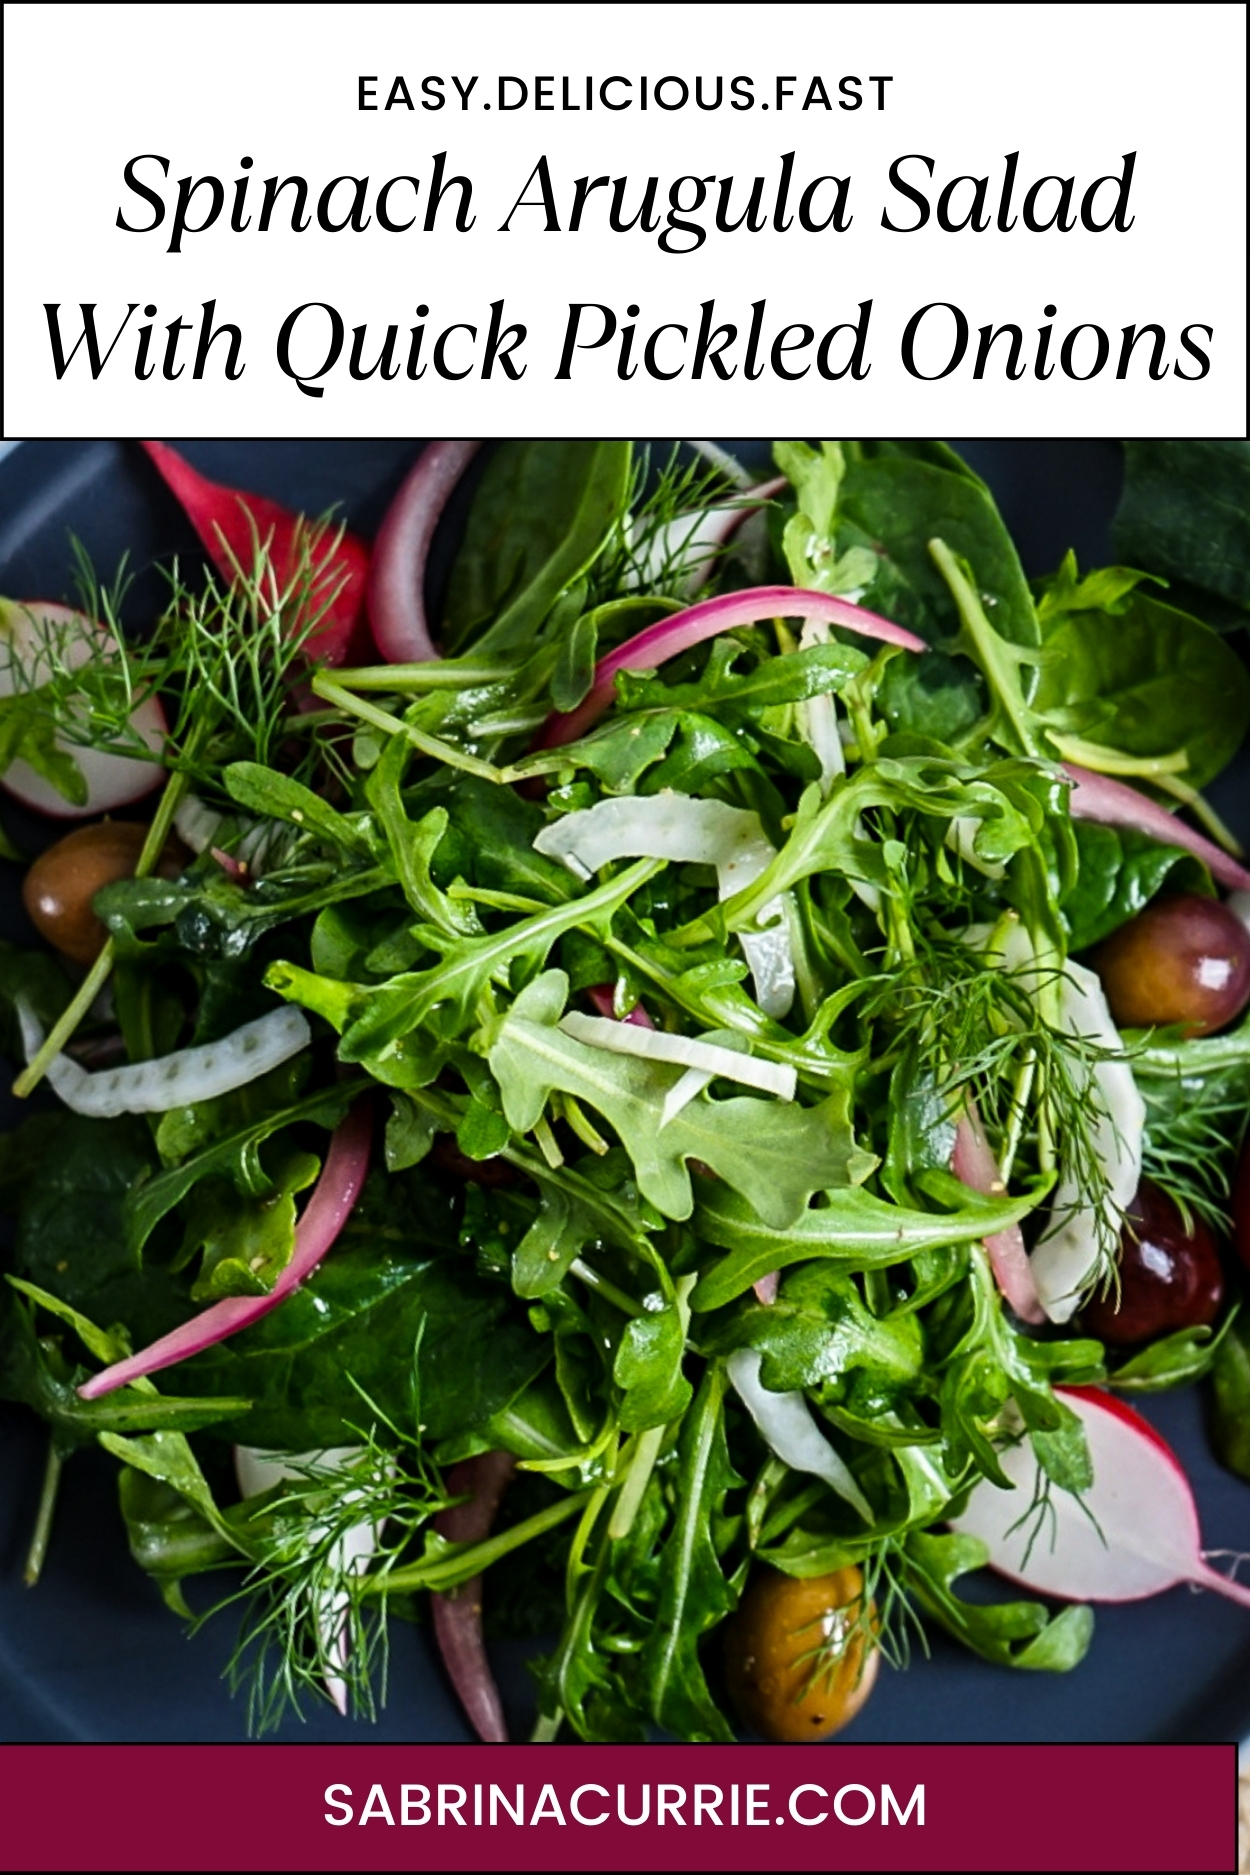 Recipe title above the photo of green spinach and arugula salad with sliced radishes, red onions and slivered fennel.